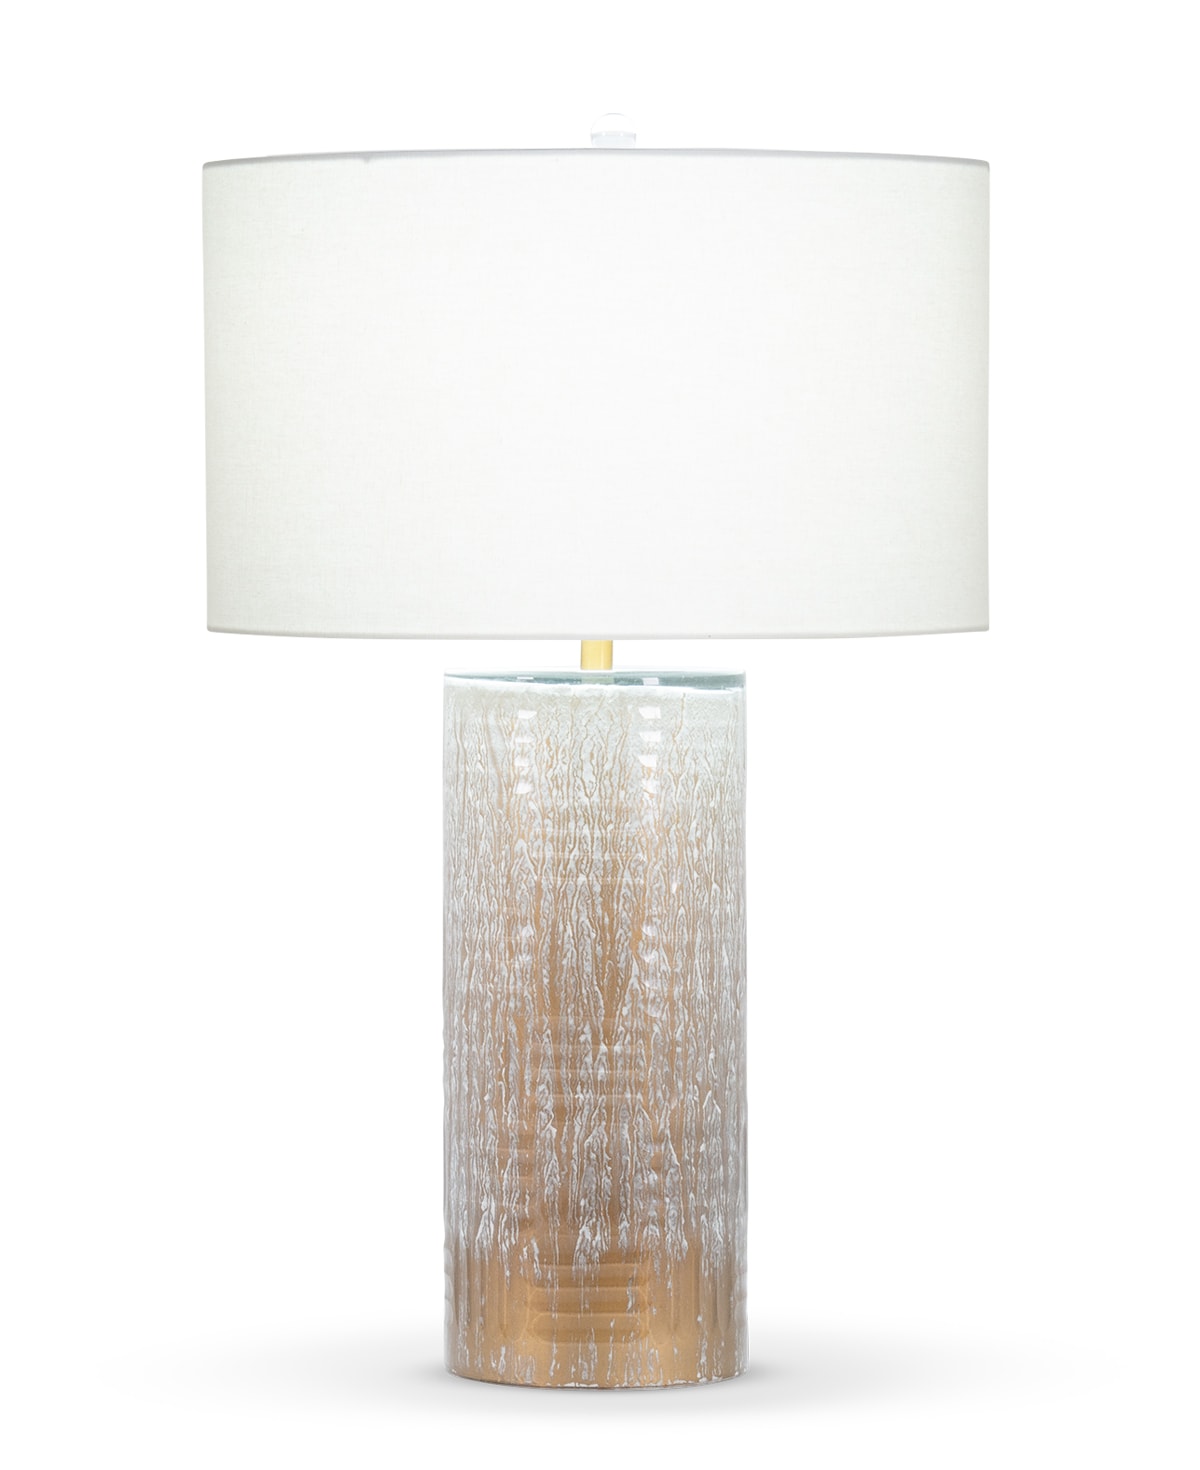 FlowDecor Moraine Table Lamp in mouth-blown glass with brown finish and off-white linen drum shade (# 4070)